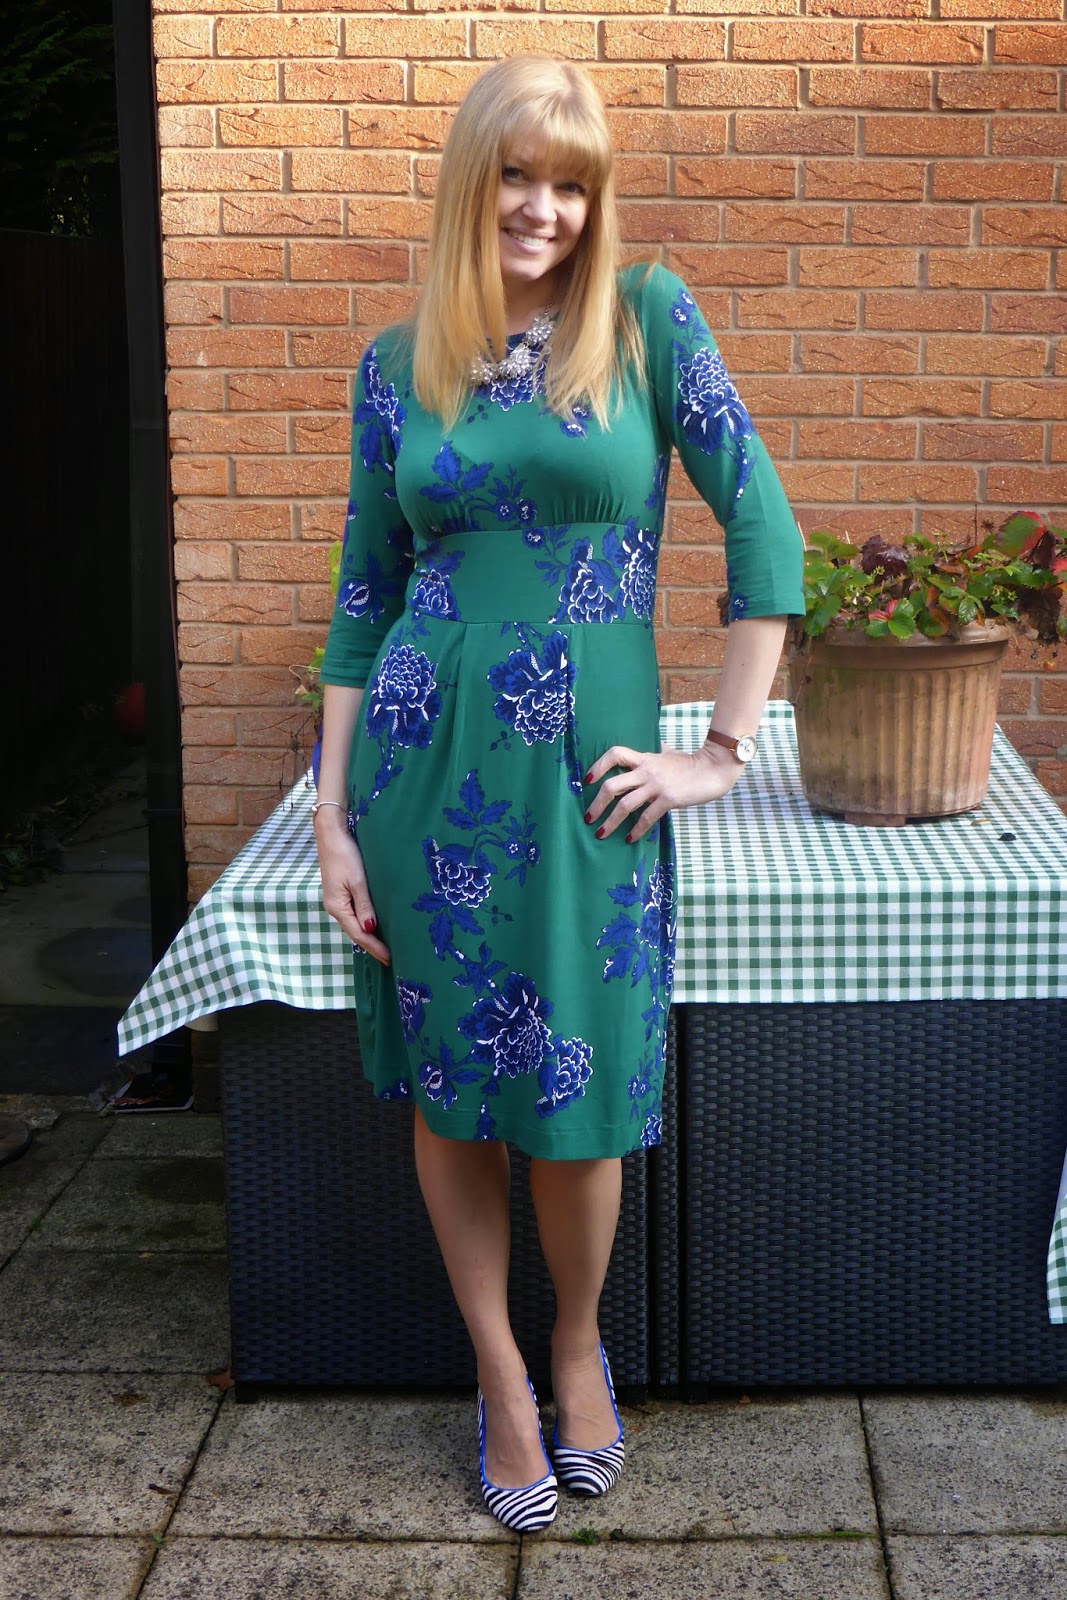 Outfit Post: Floral dress with Zebra Print Shoes - What Lizzy Loves